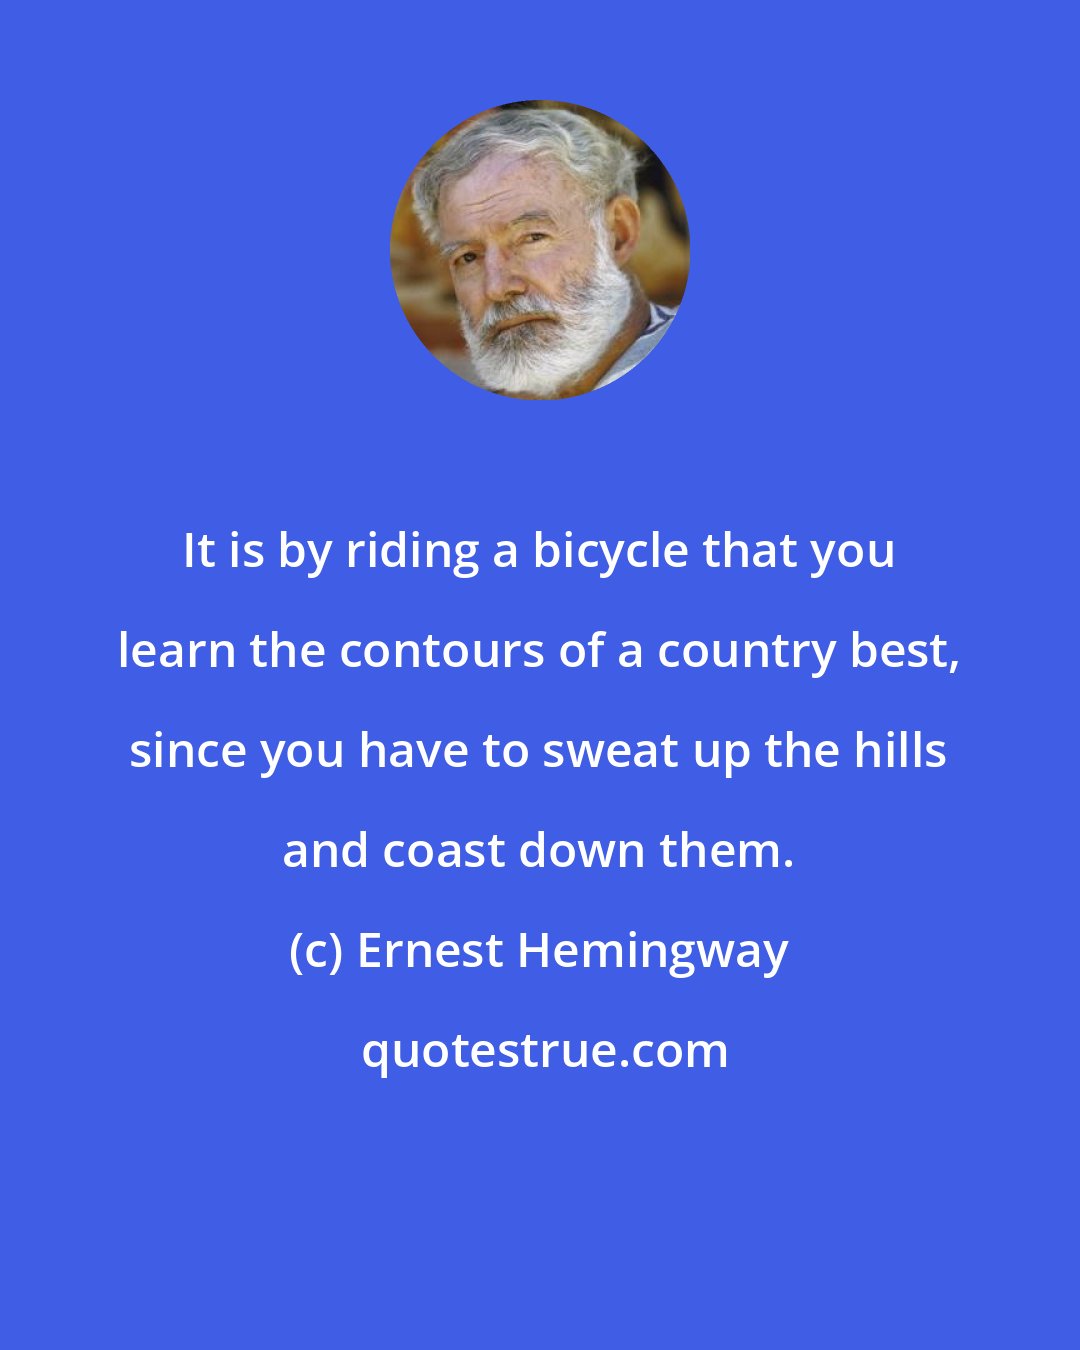 Ernest Hemingway: It is by riding a bicycle that you learn the contours of a country best, since you have to sweat up the hills and coast down them.